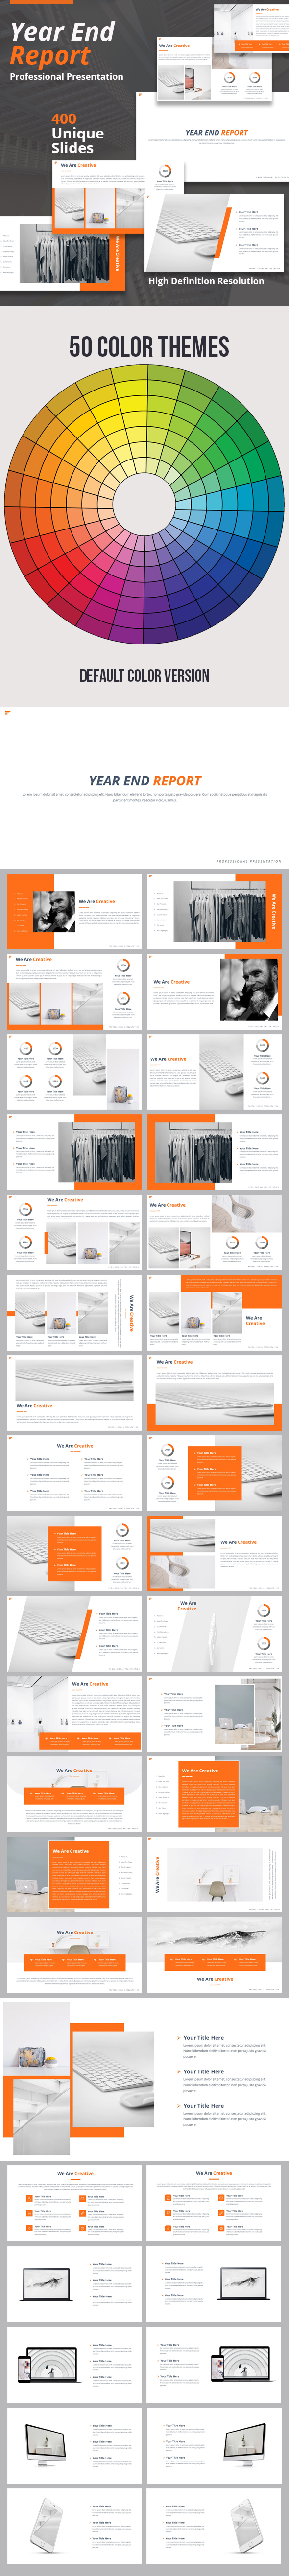 Year End Report Powerpoint Presentation Template